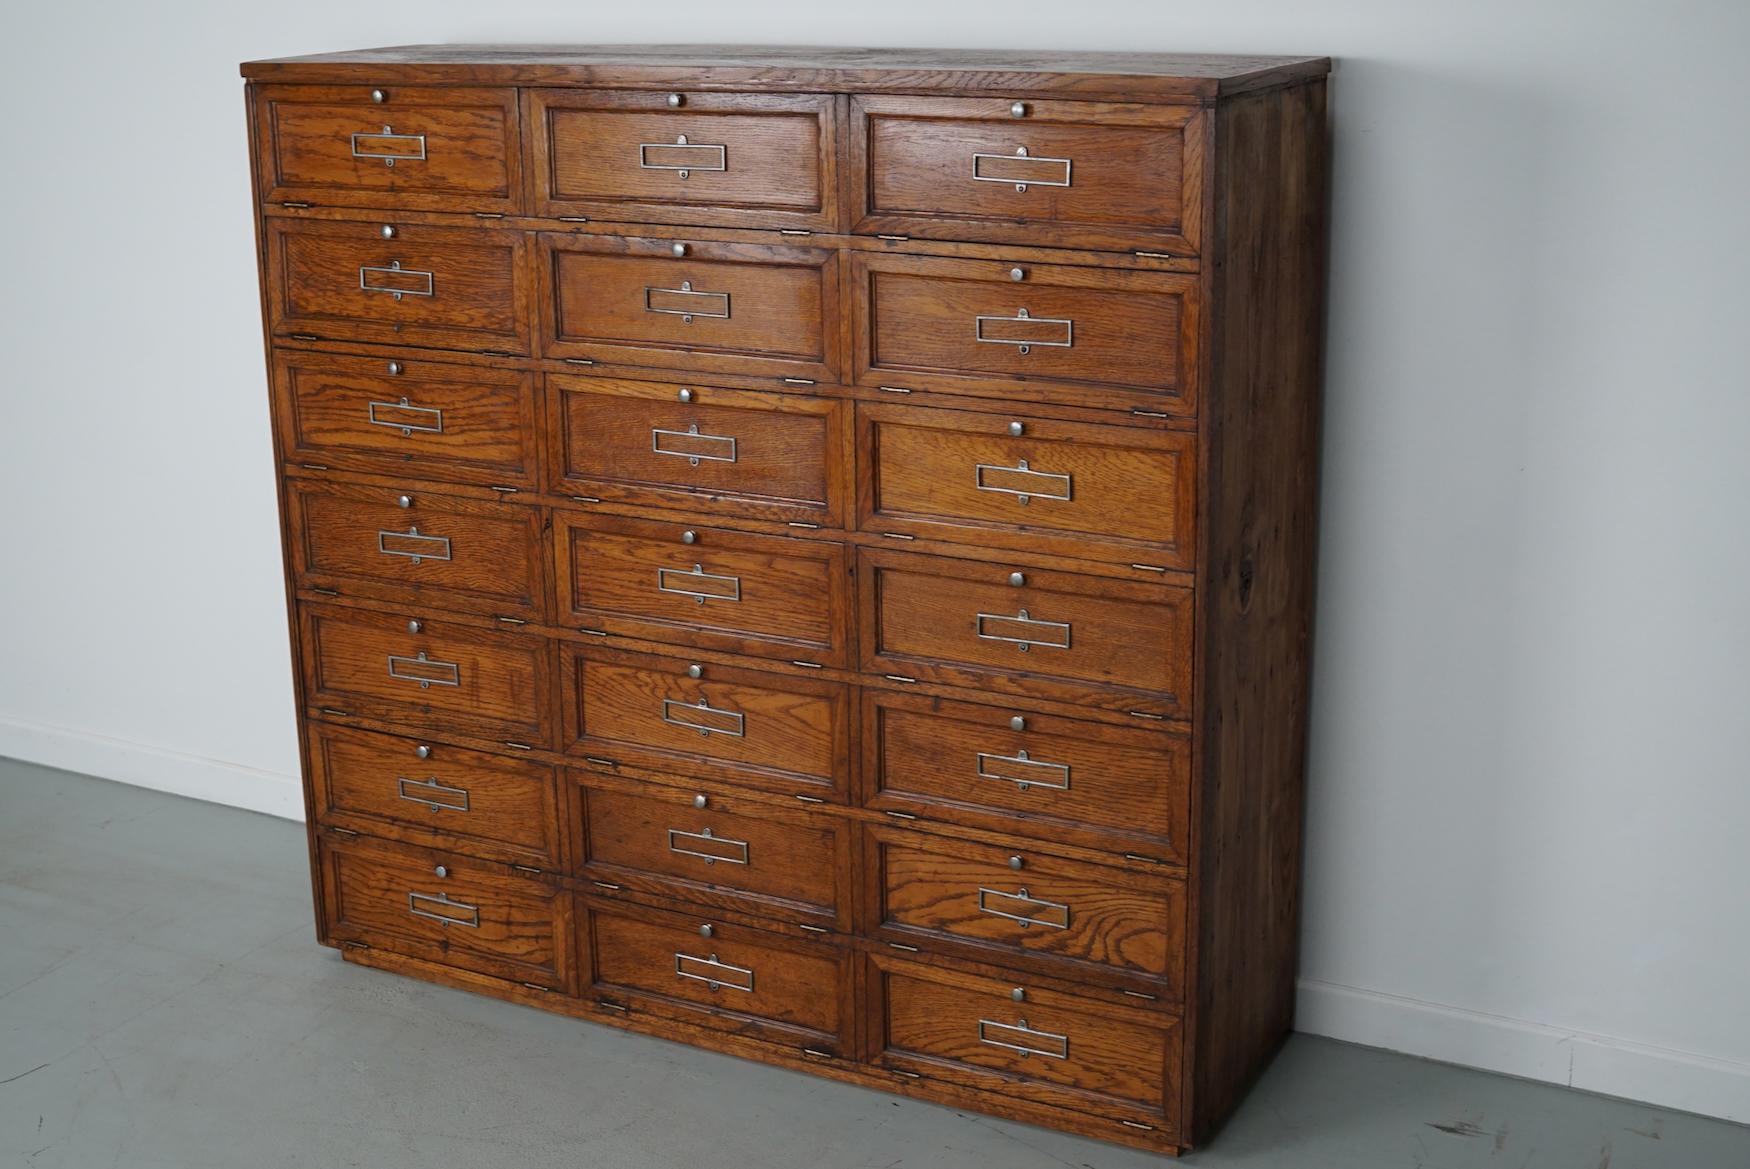 This French oak cabinet was designed and made, circa 1920 in France. It features 21 compartments with drop down doors that were used to store files. It was previously owned and used by the bank of France. The compartment measurements are: D 32 x W